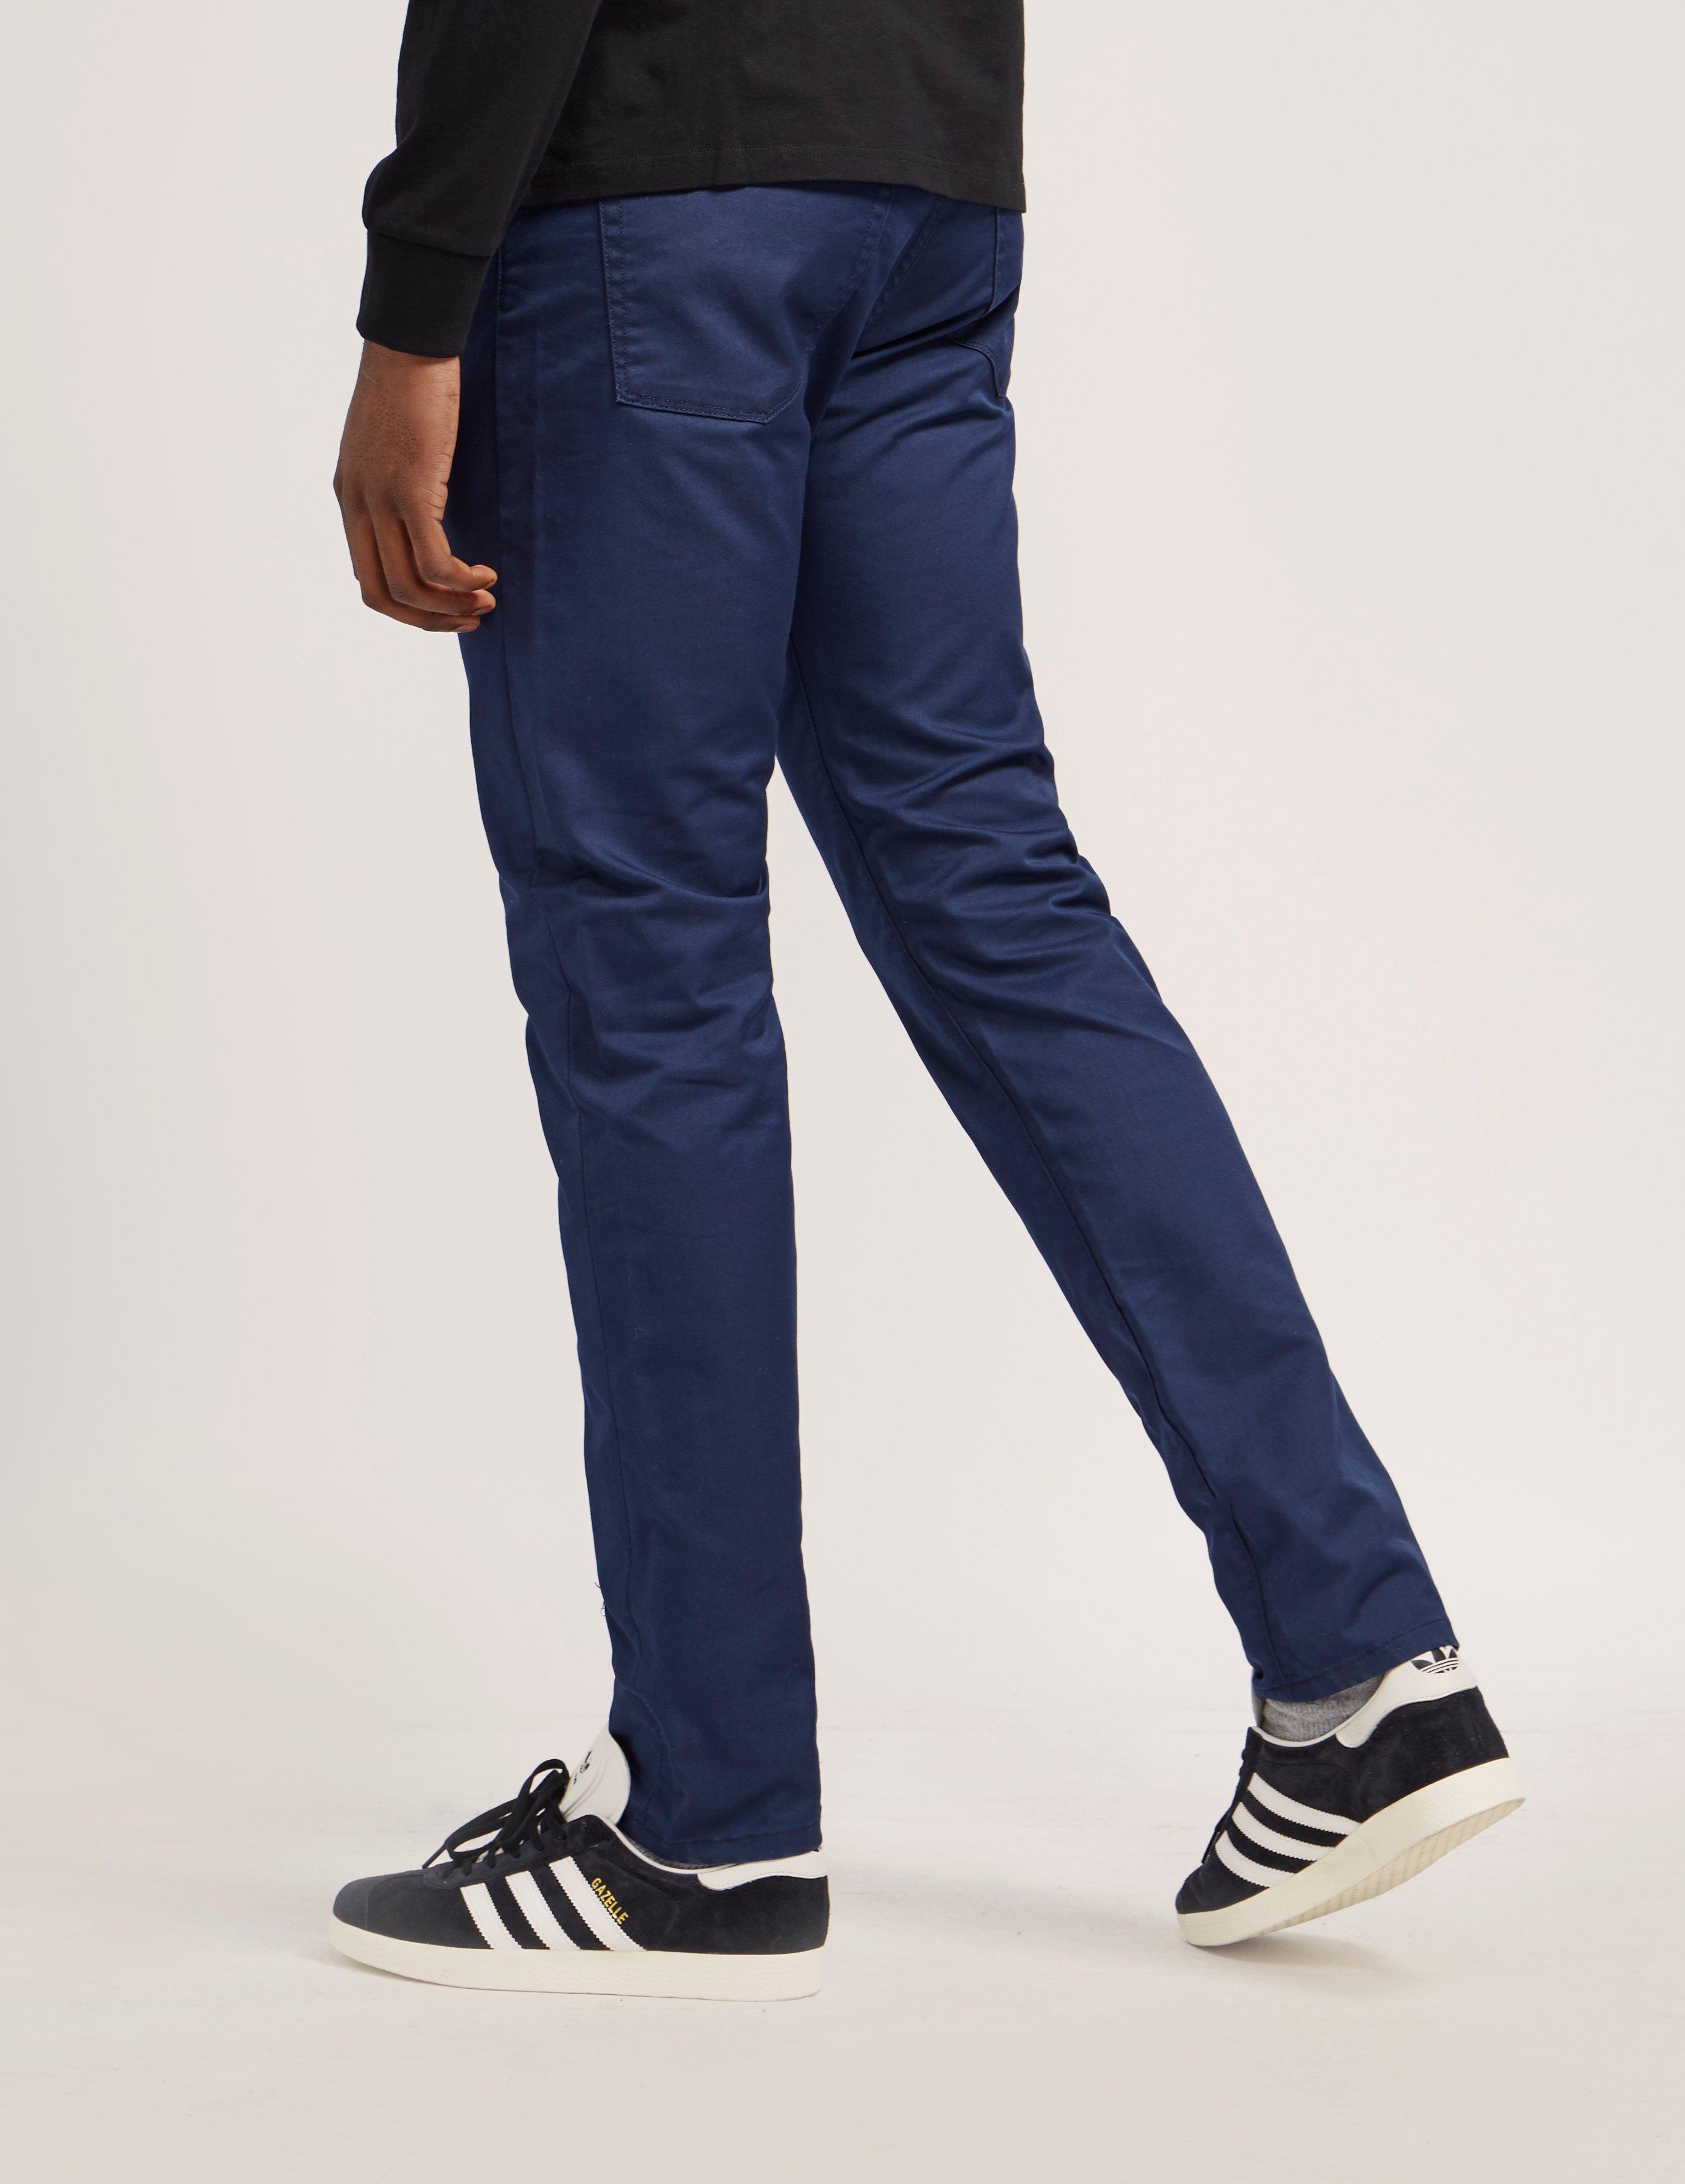 Carhartt Wip Vicious Pant Online Sale, UP TO 60% OFF